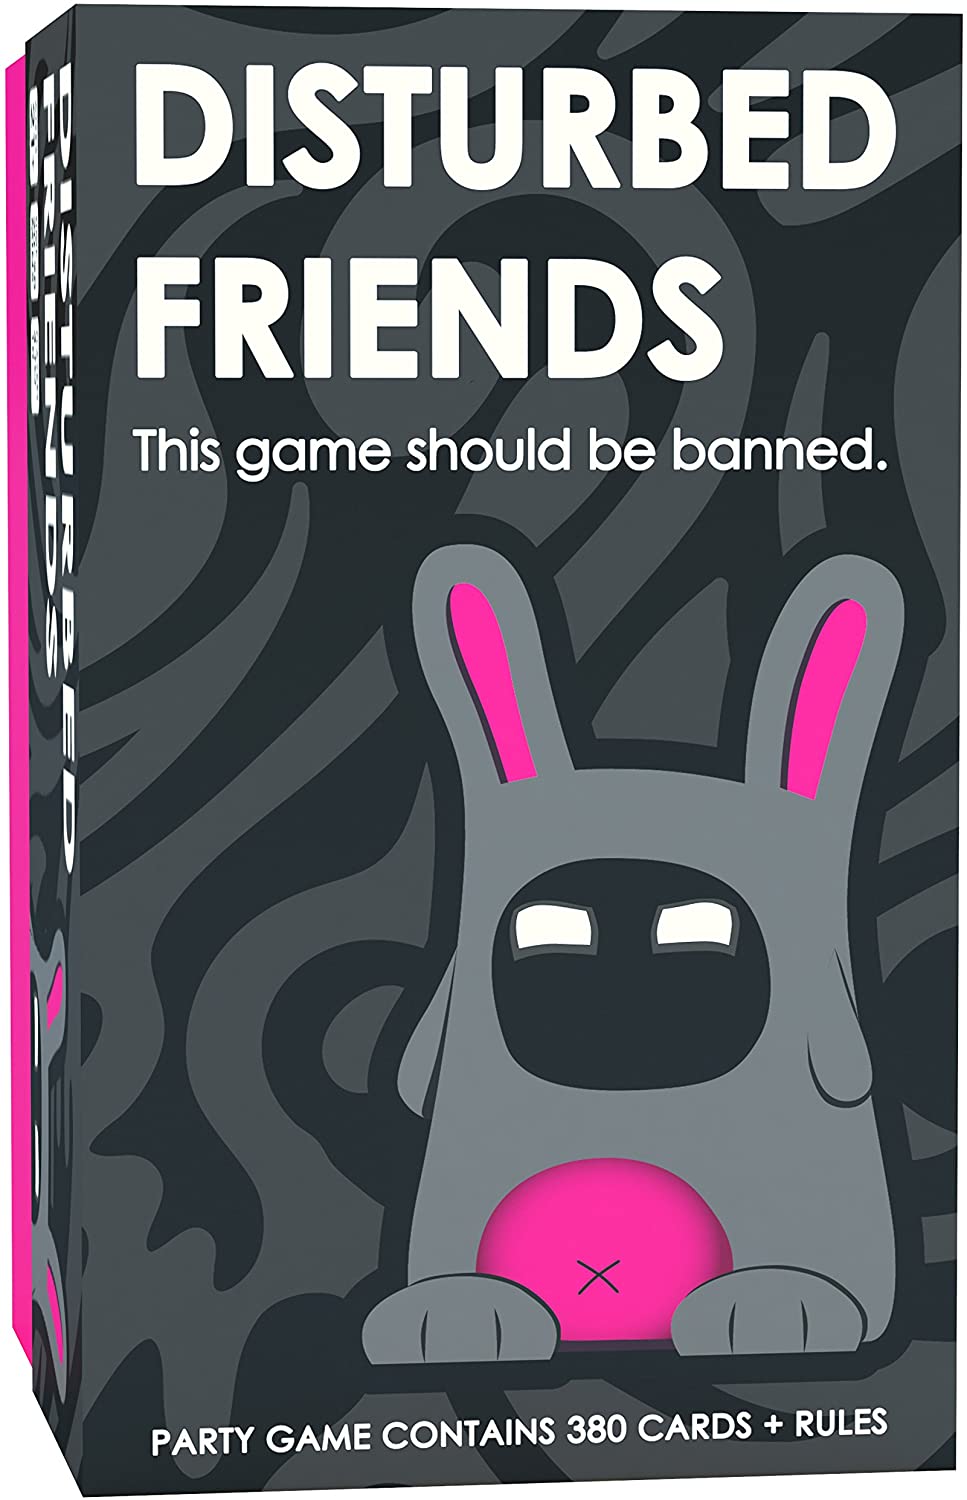 Disturbed Friends - This game should be banned.